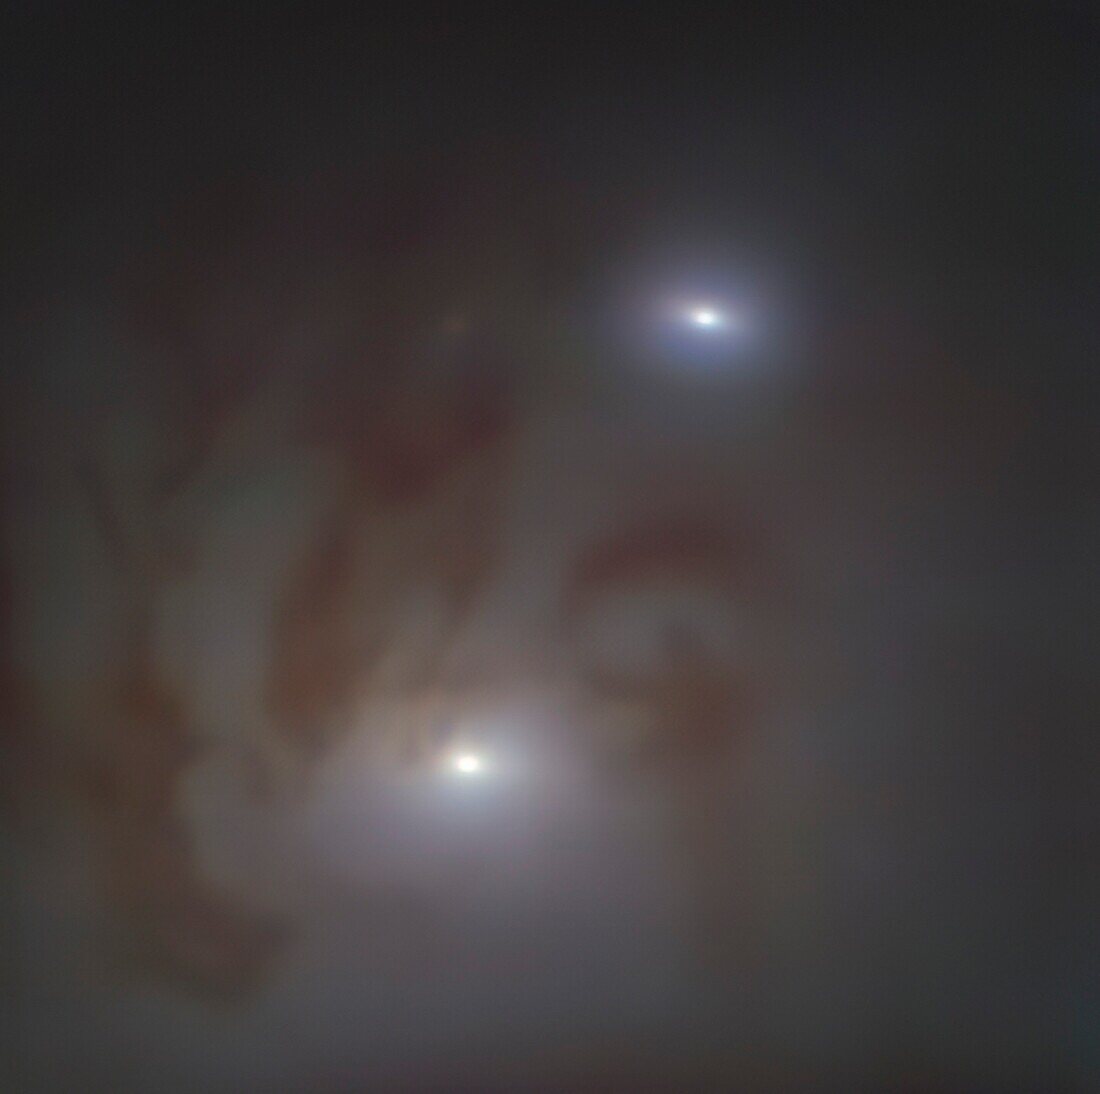 Two bright galactic nuclei, Very Large Telescope image